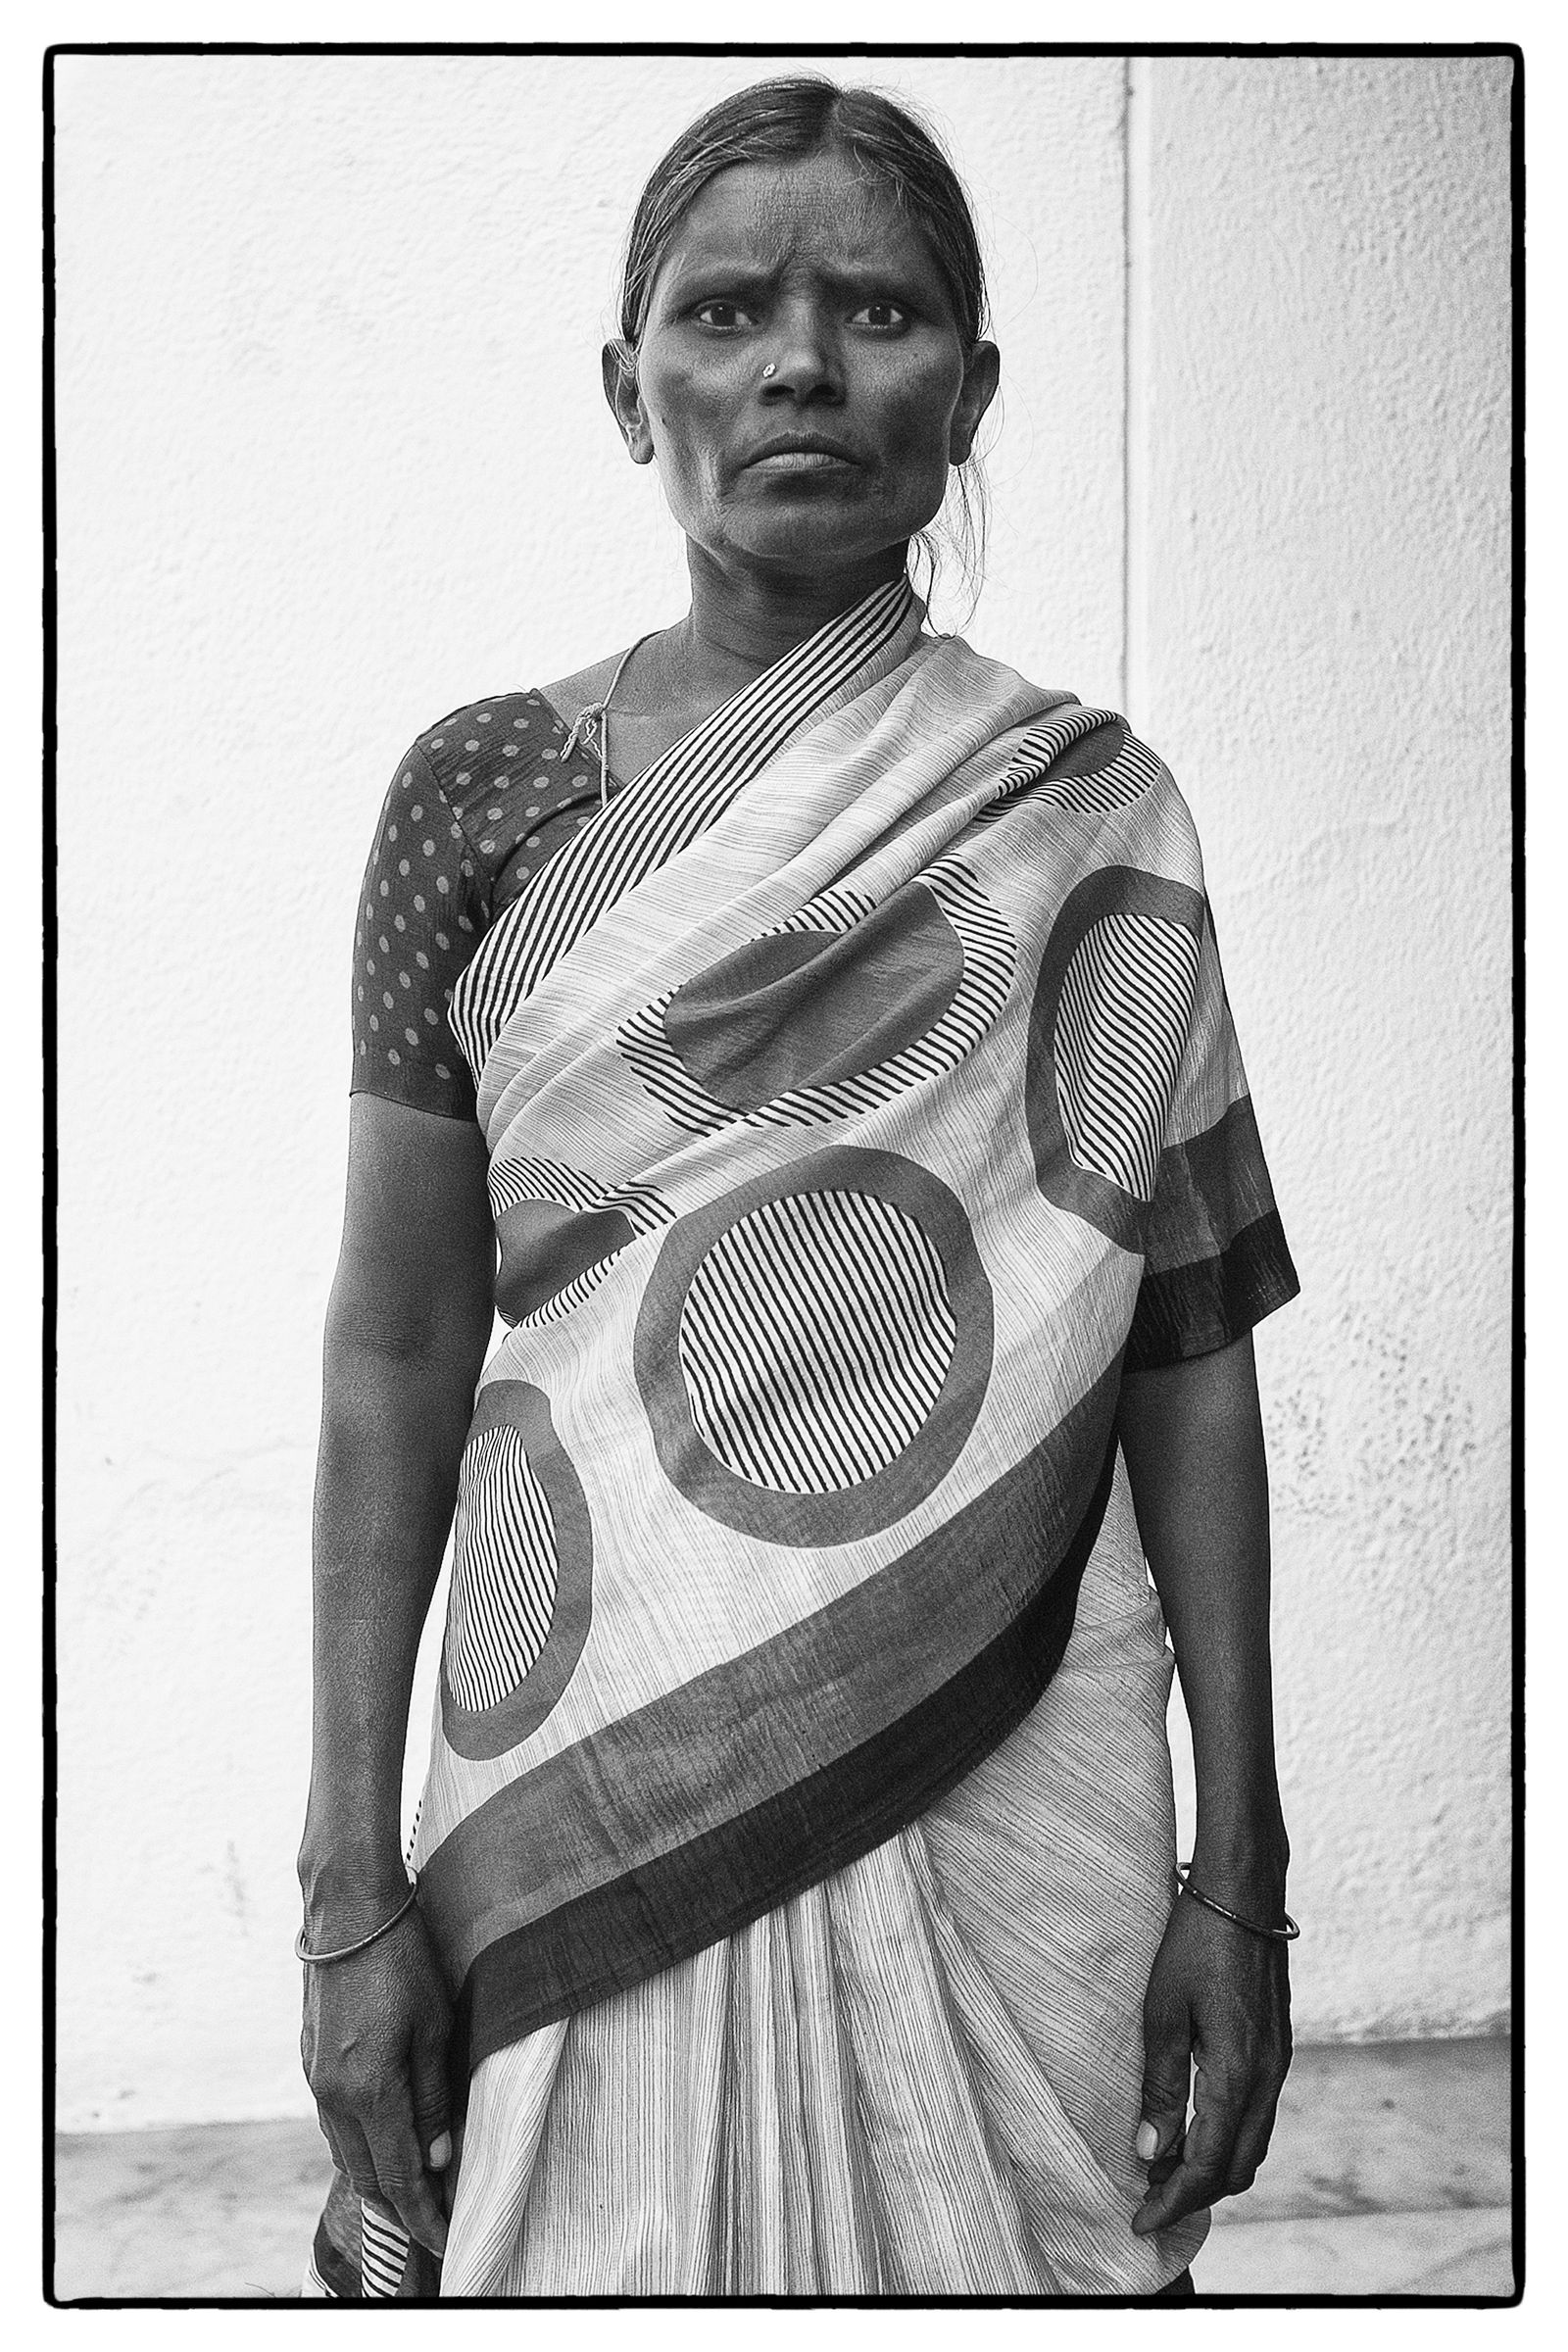 © Vijay S. Jodha - Image from the The First Witnesses photography project